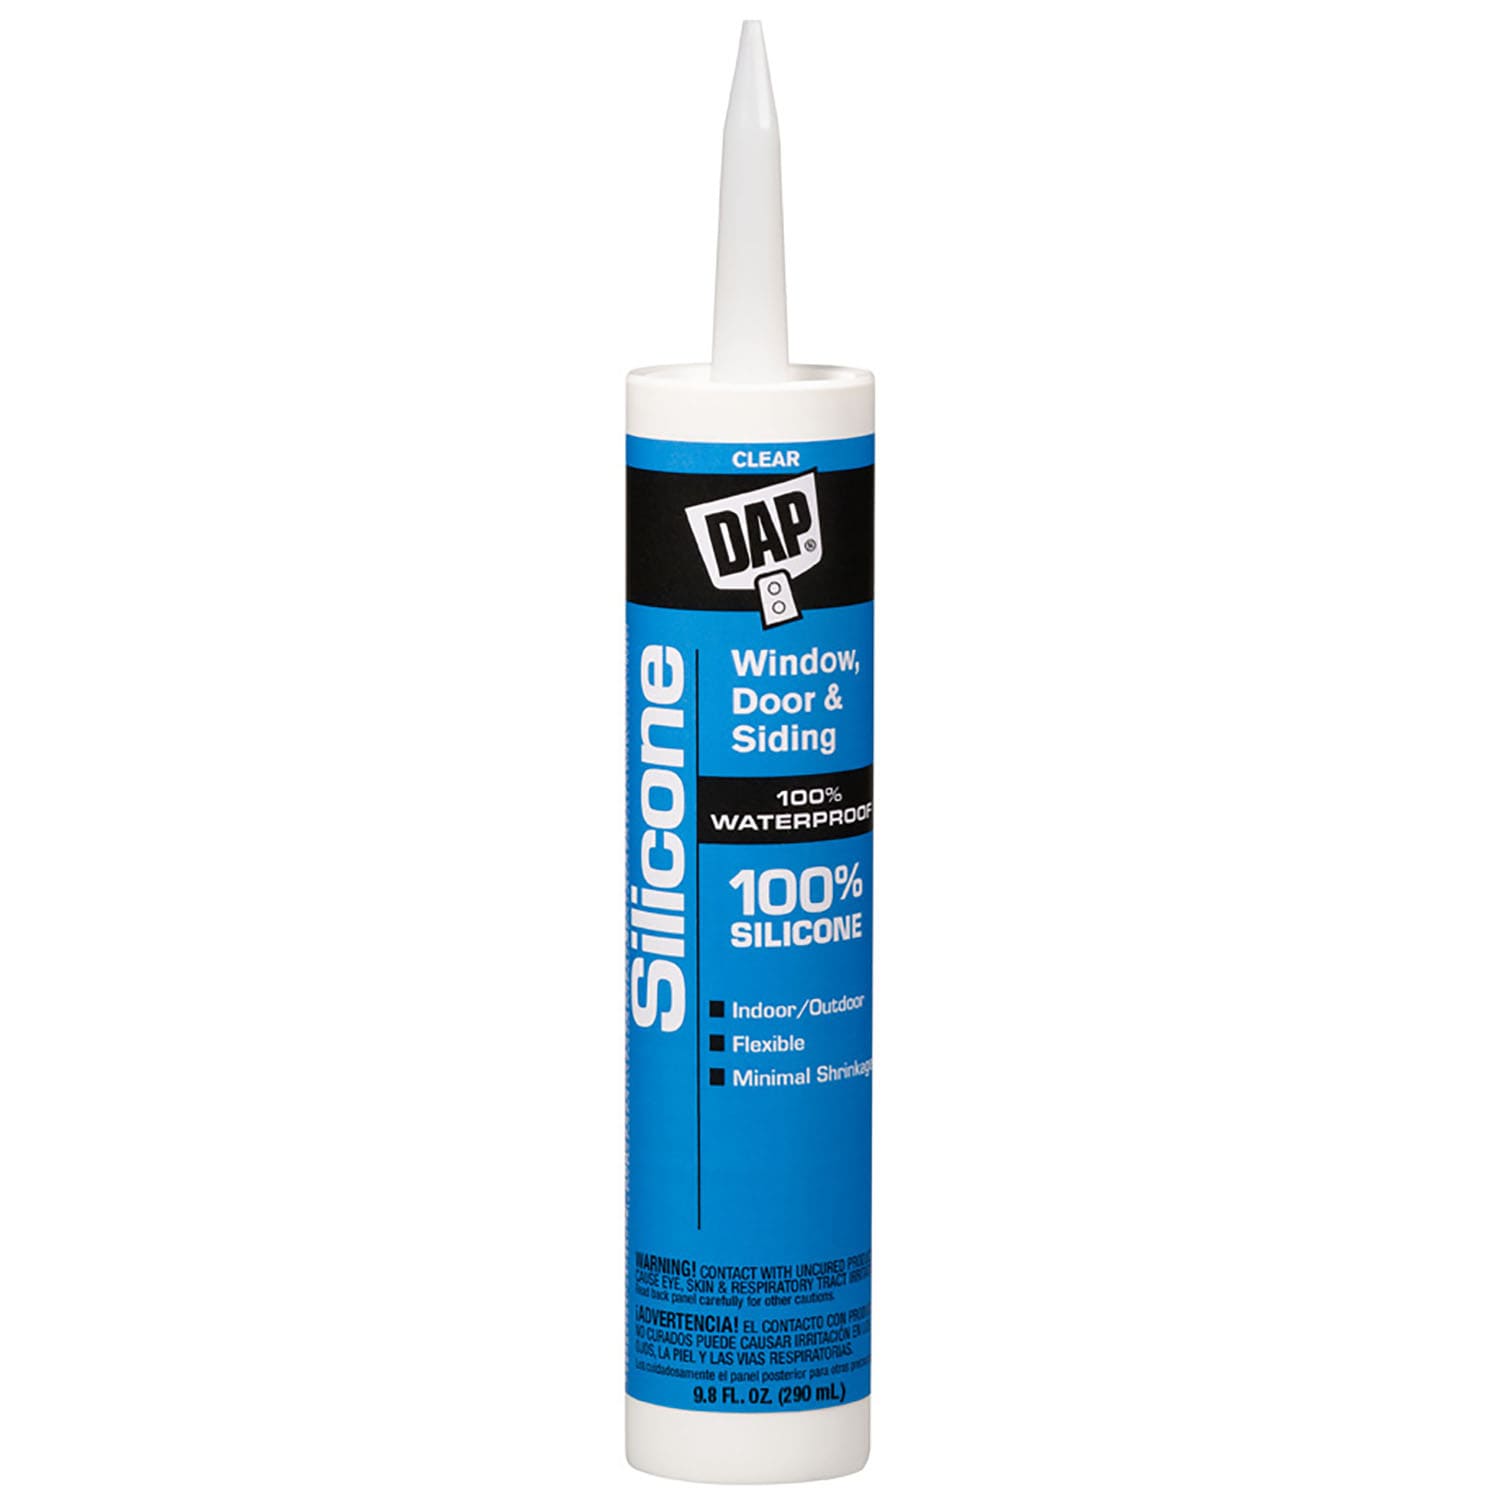 LEXAN 2.8-oz Clear Silicone Caulk - Flexible, Waterproof Sealant for  Interior/Exterior Use - Ideal for Kitchens, Bathrooms, and Marine  Applications in the Caulk department at